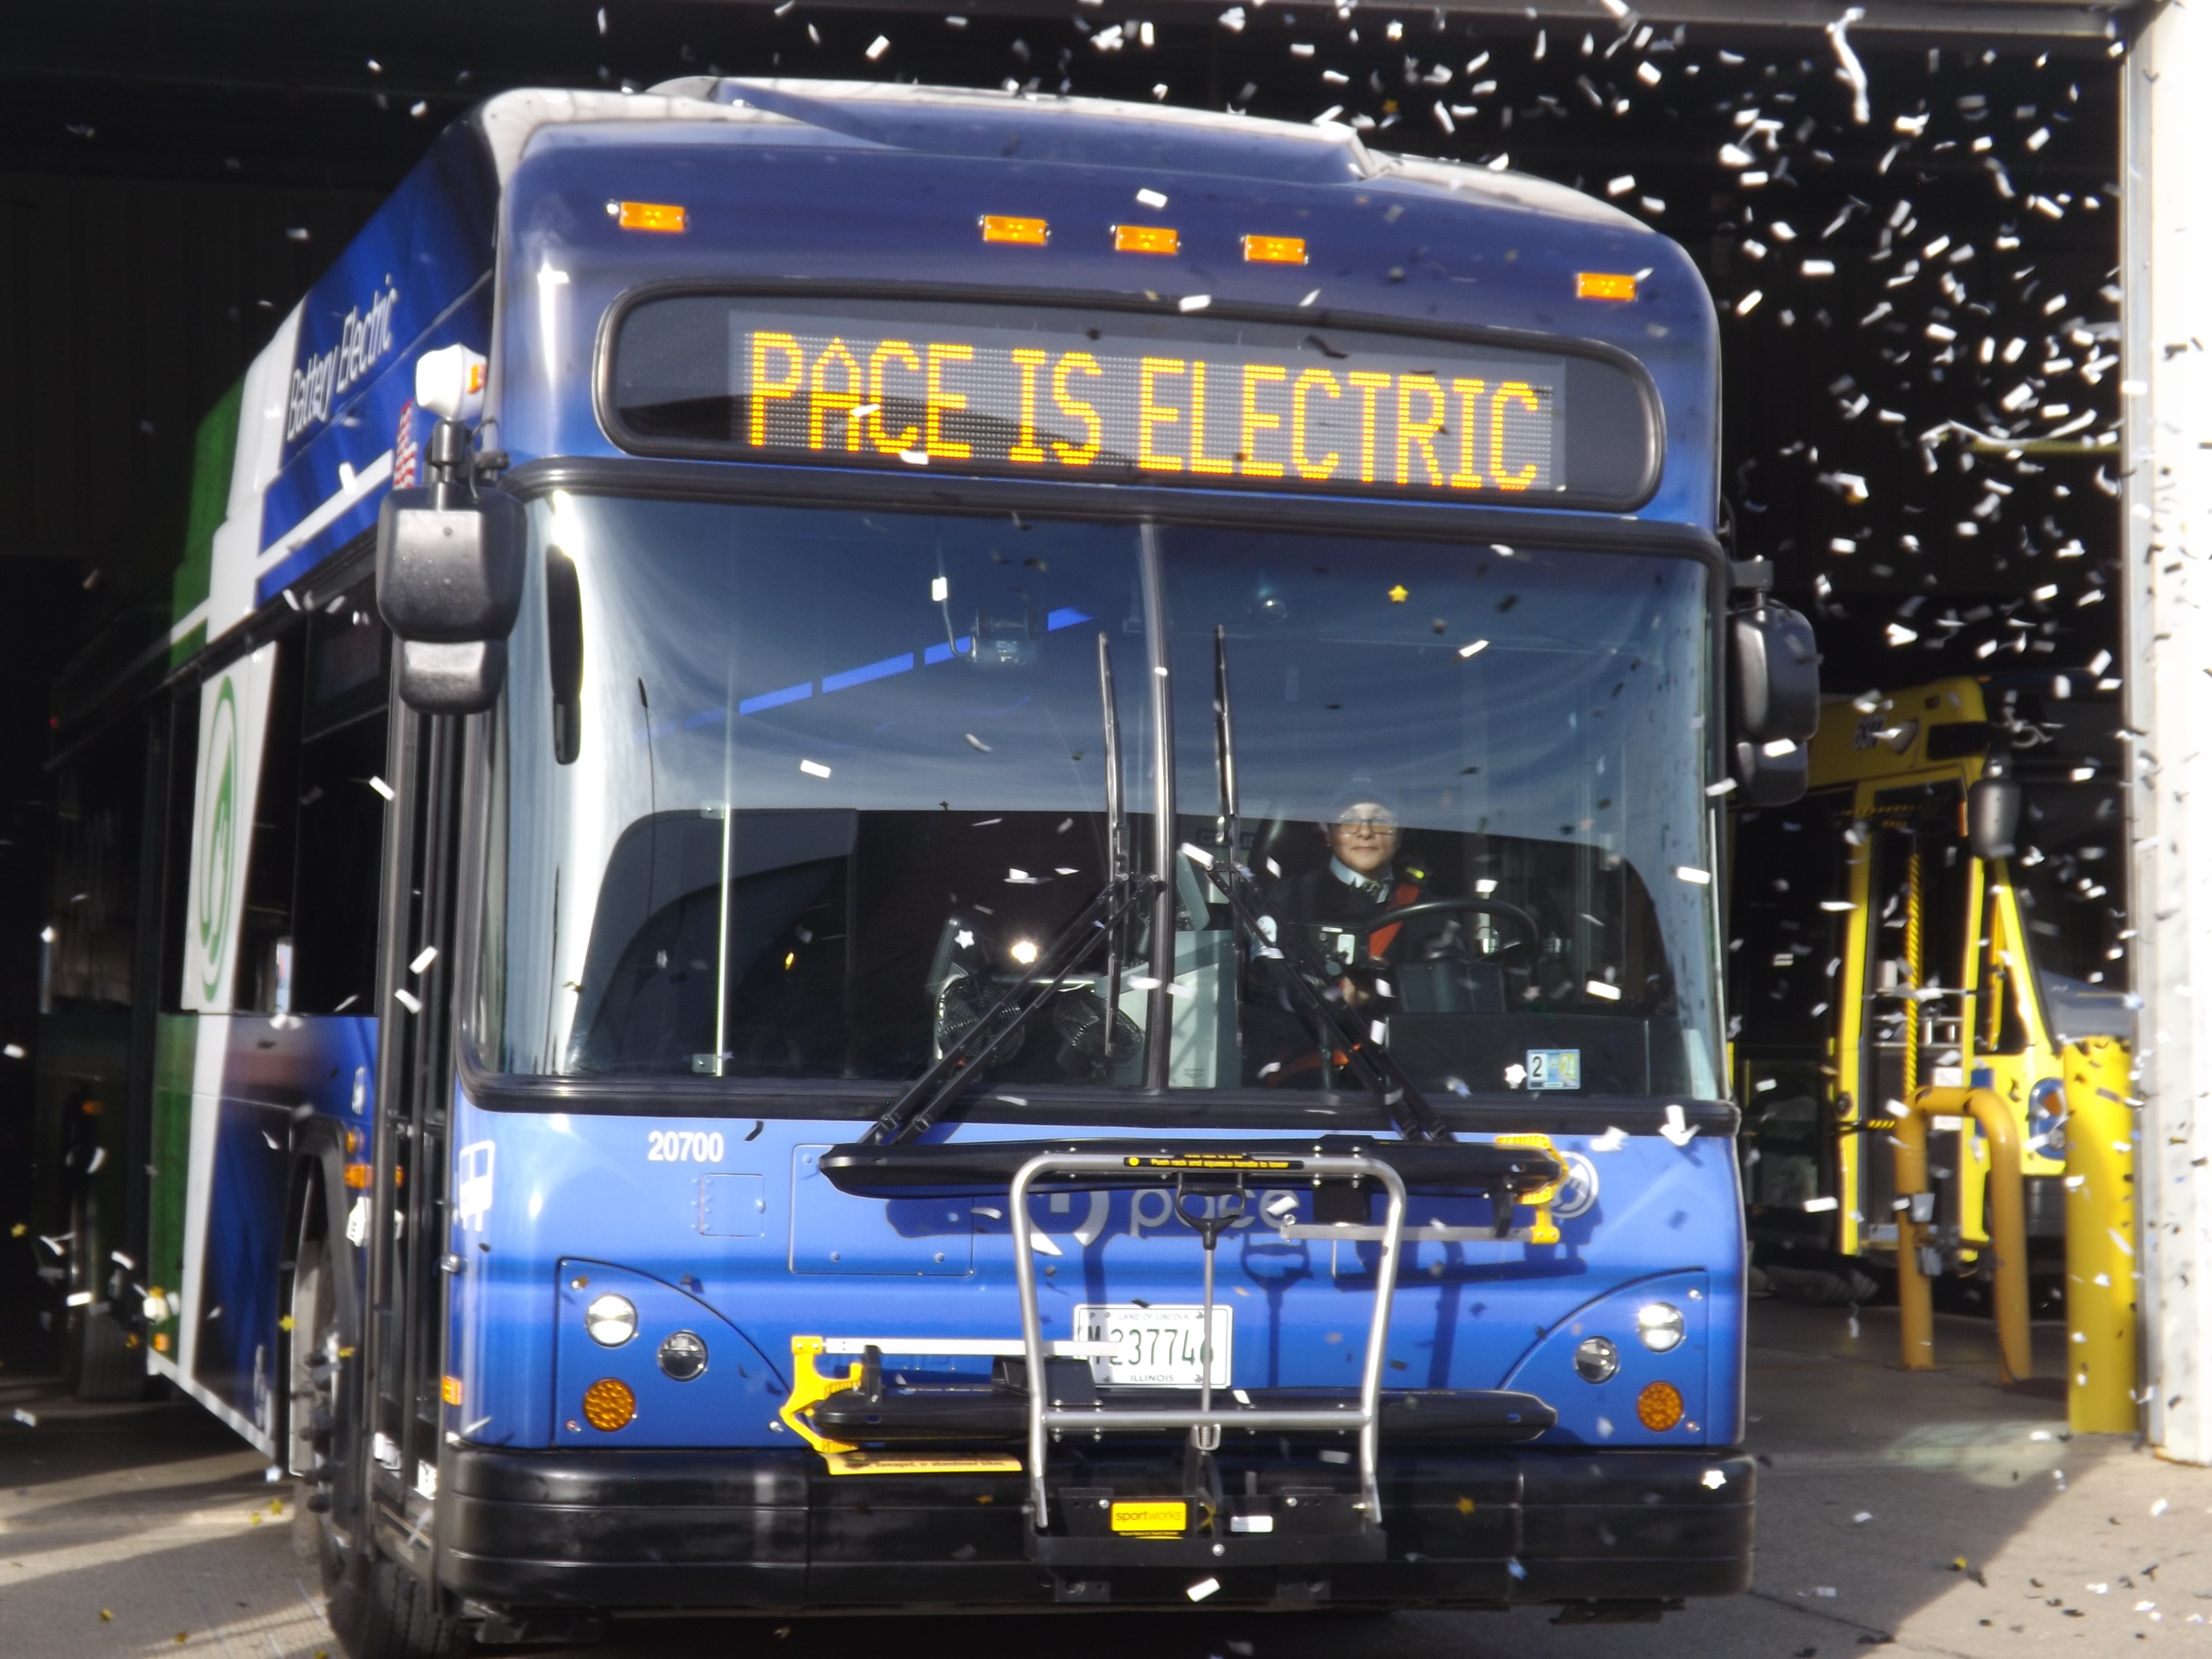 bus sprayed with confetti with "Pace is electric" on its headsign